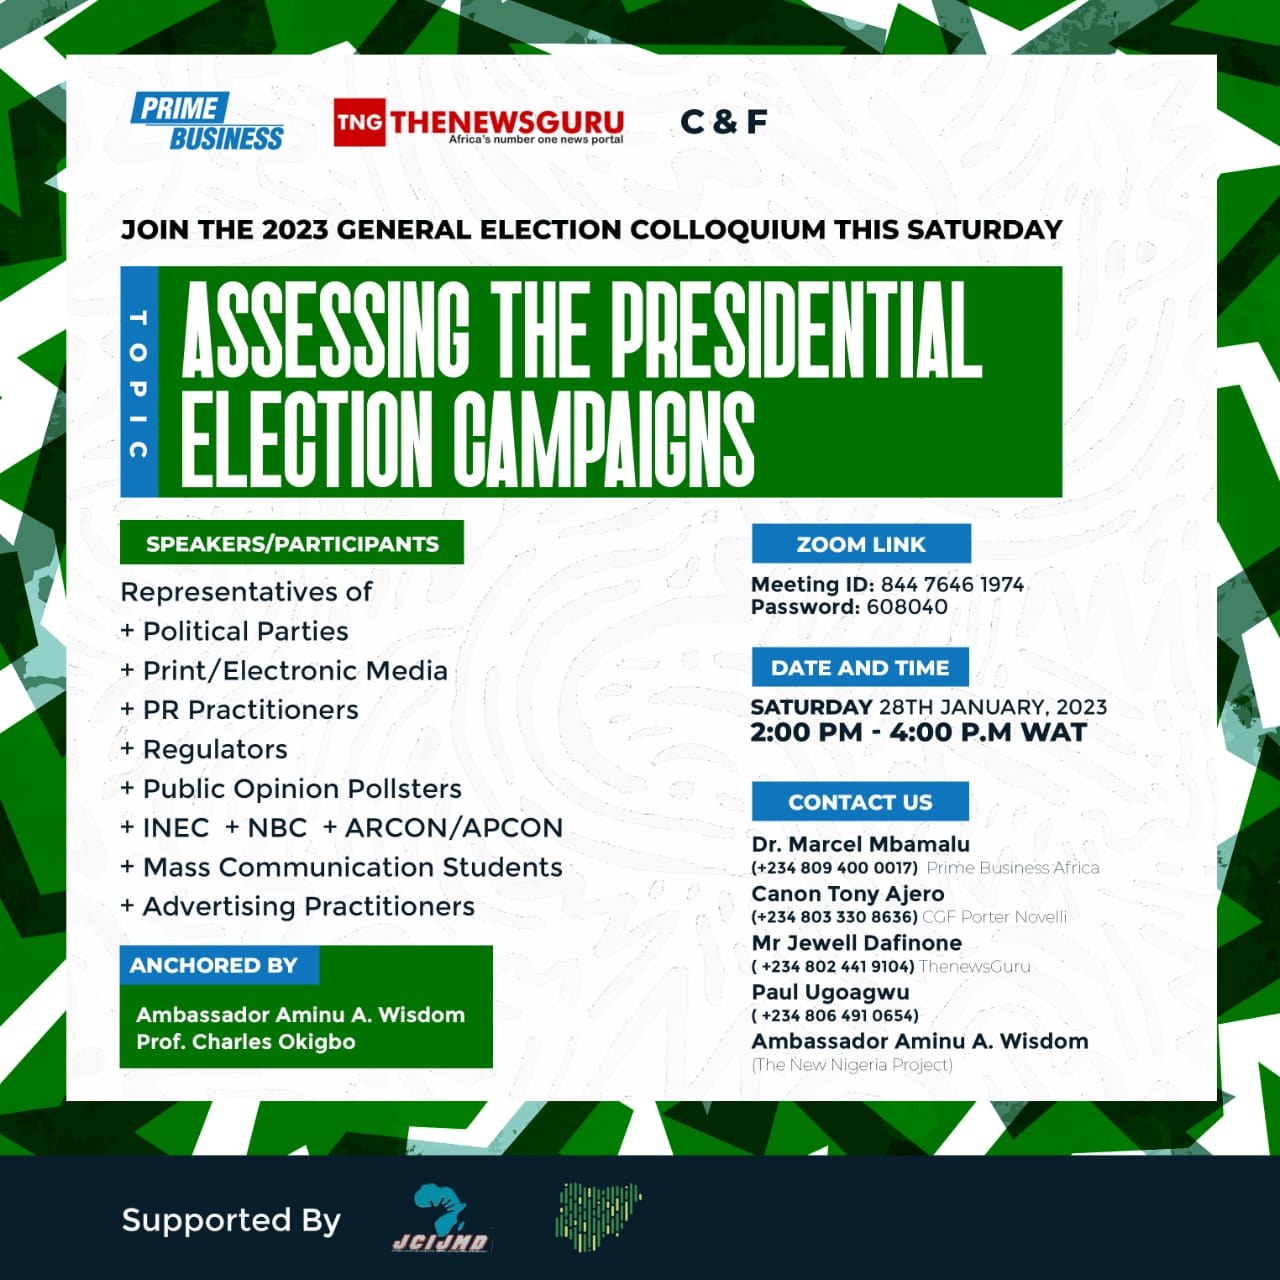 2023 Election Campaigns: How experts brainstormed on character assassination, attacks among politicians